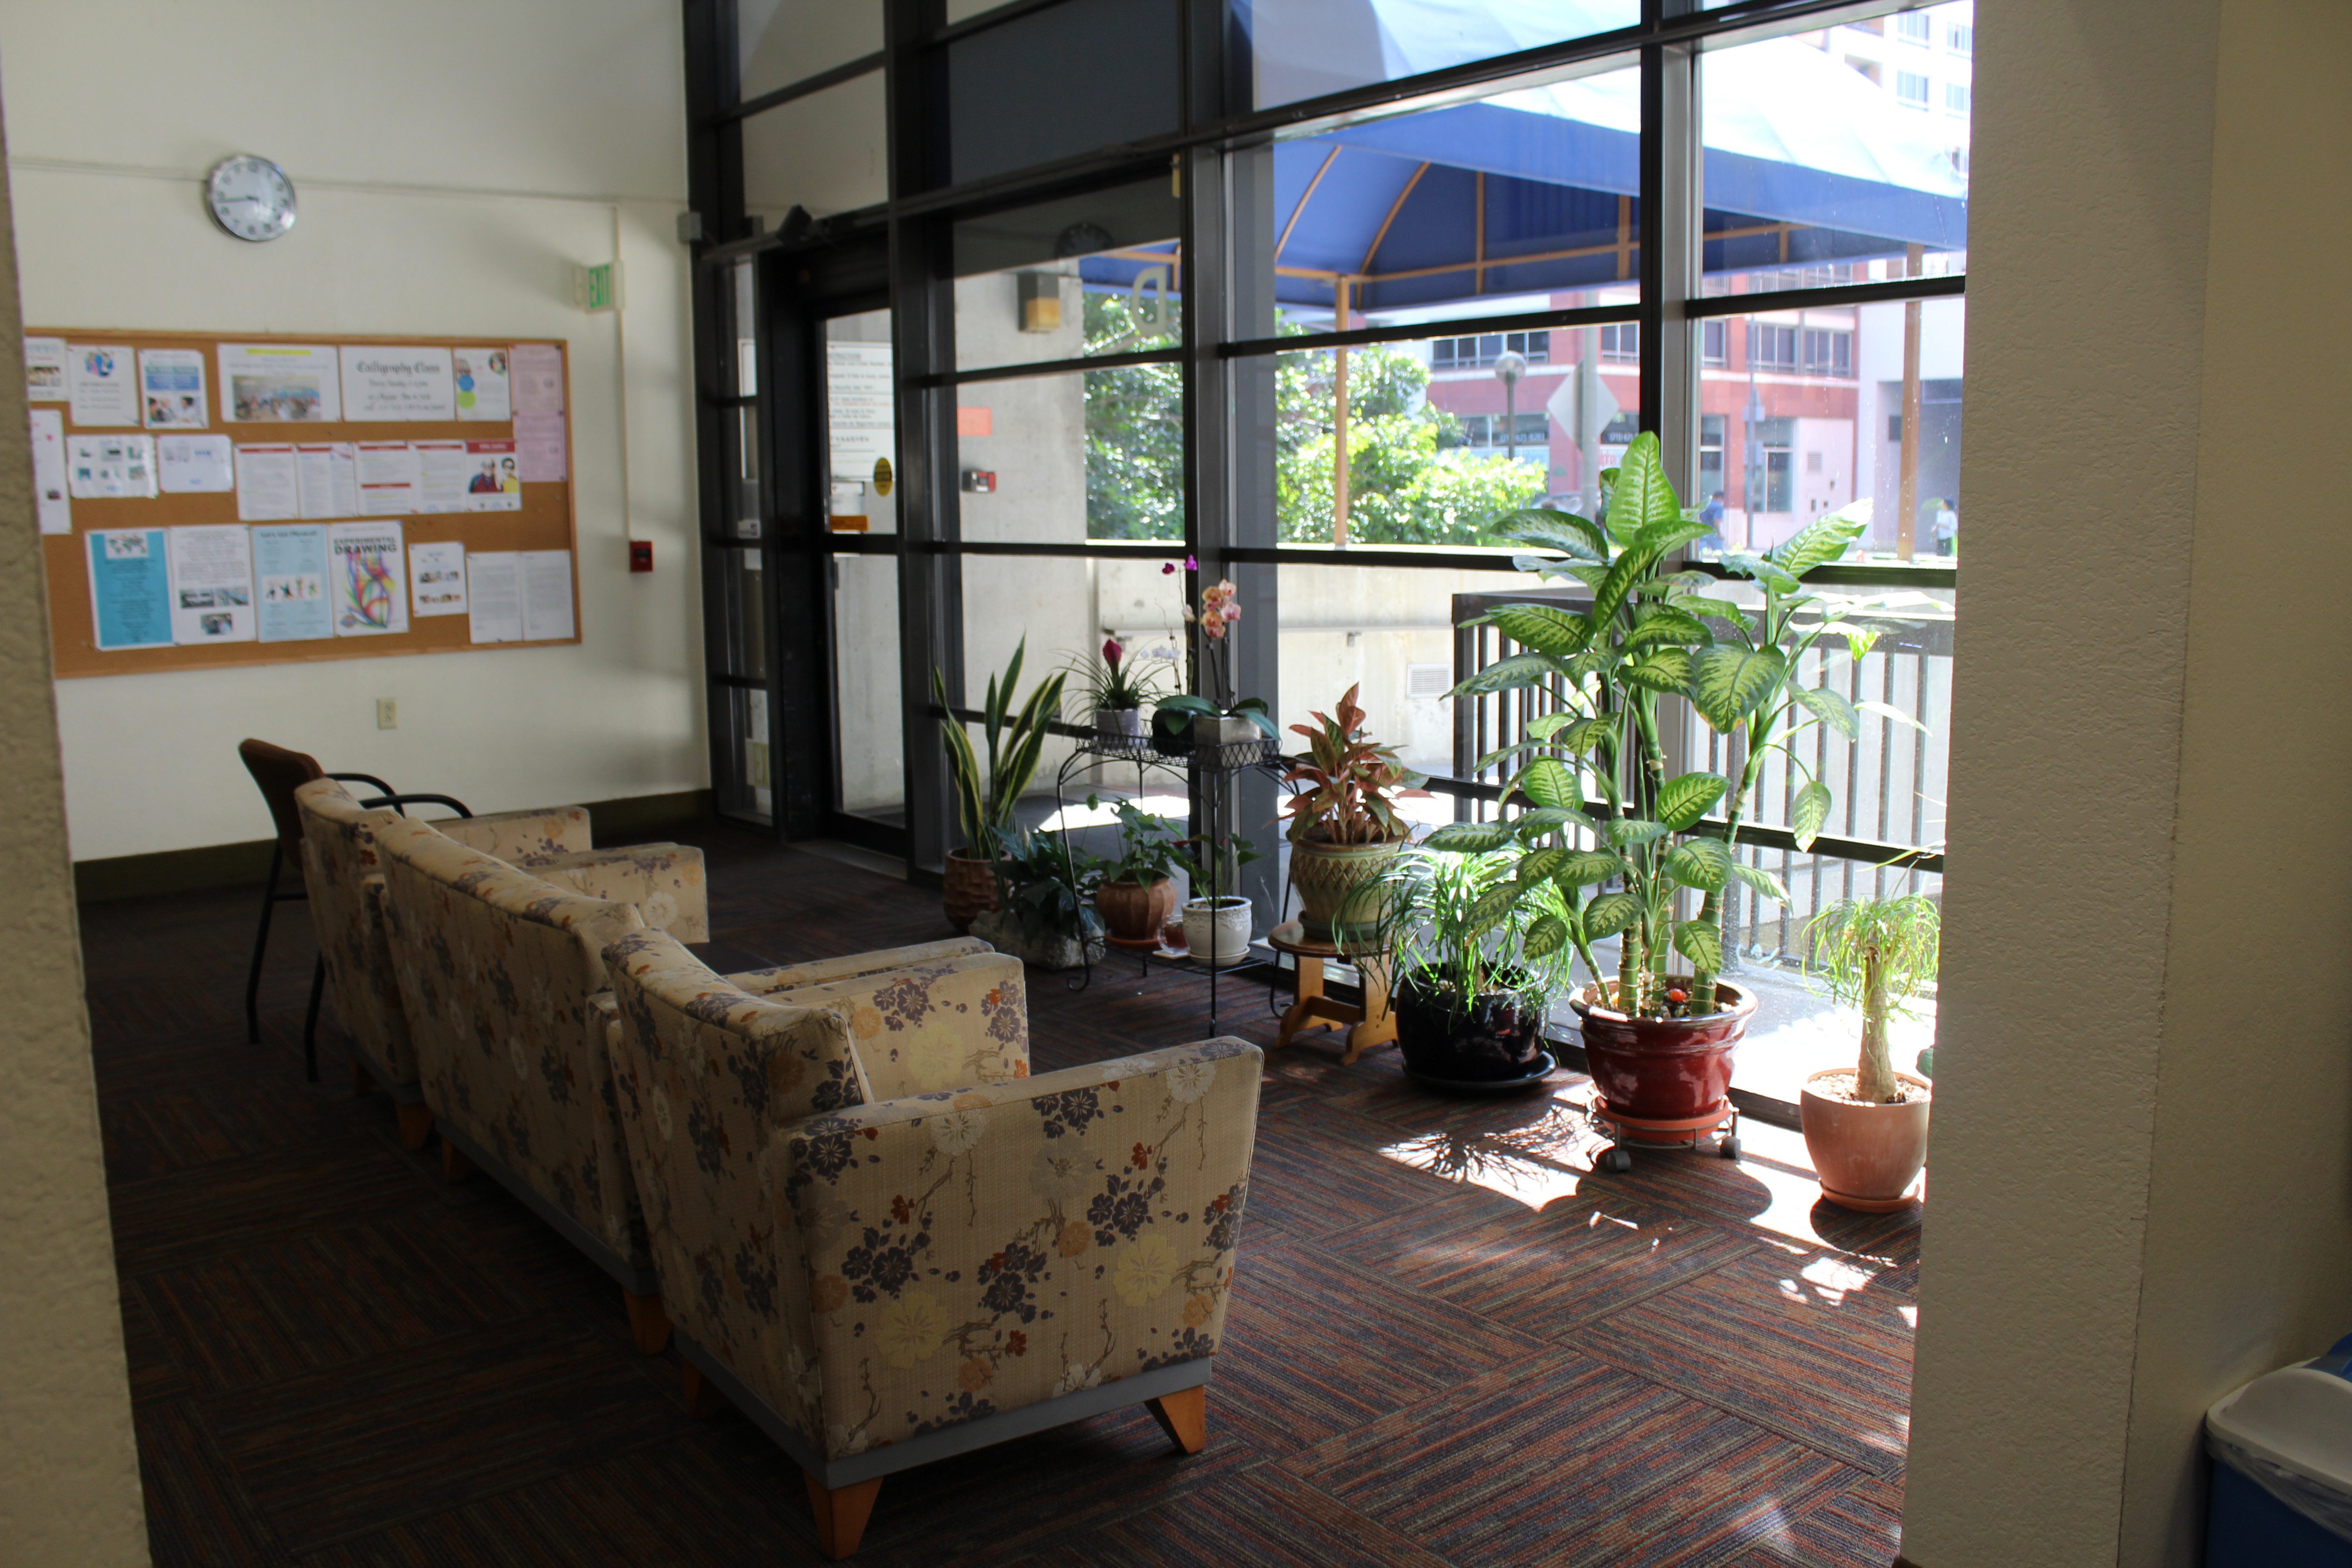 Interior view of a community area at Angelus Plaza 2. A few sofa chairs facing the windows, potted plants along the windows and a bulletin board with information attached.